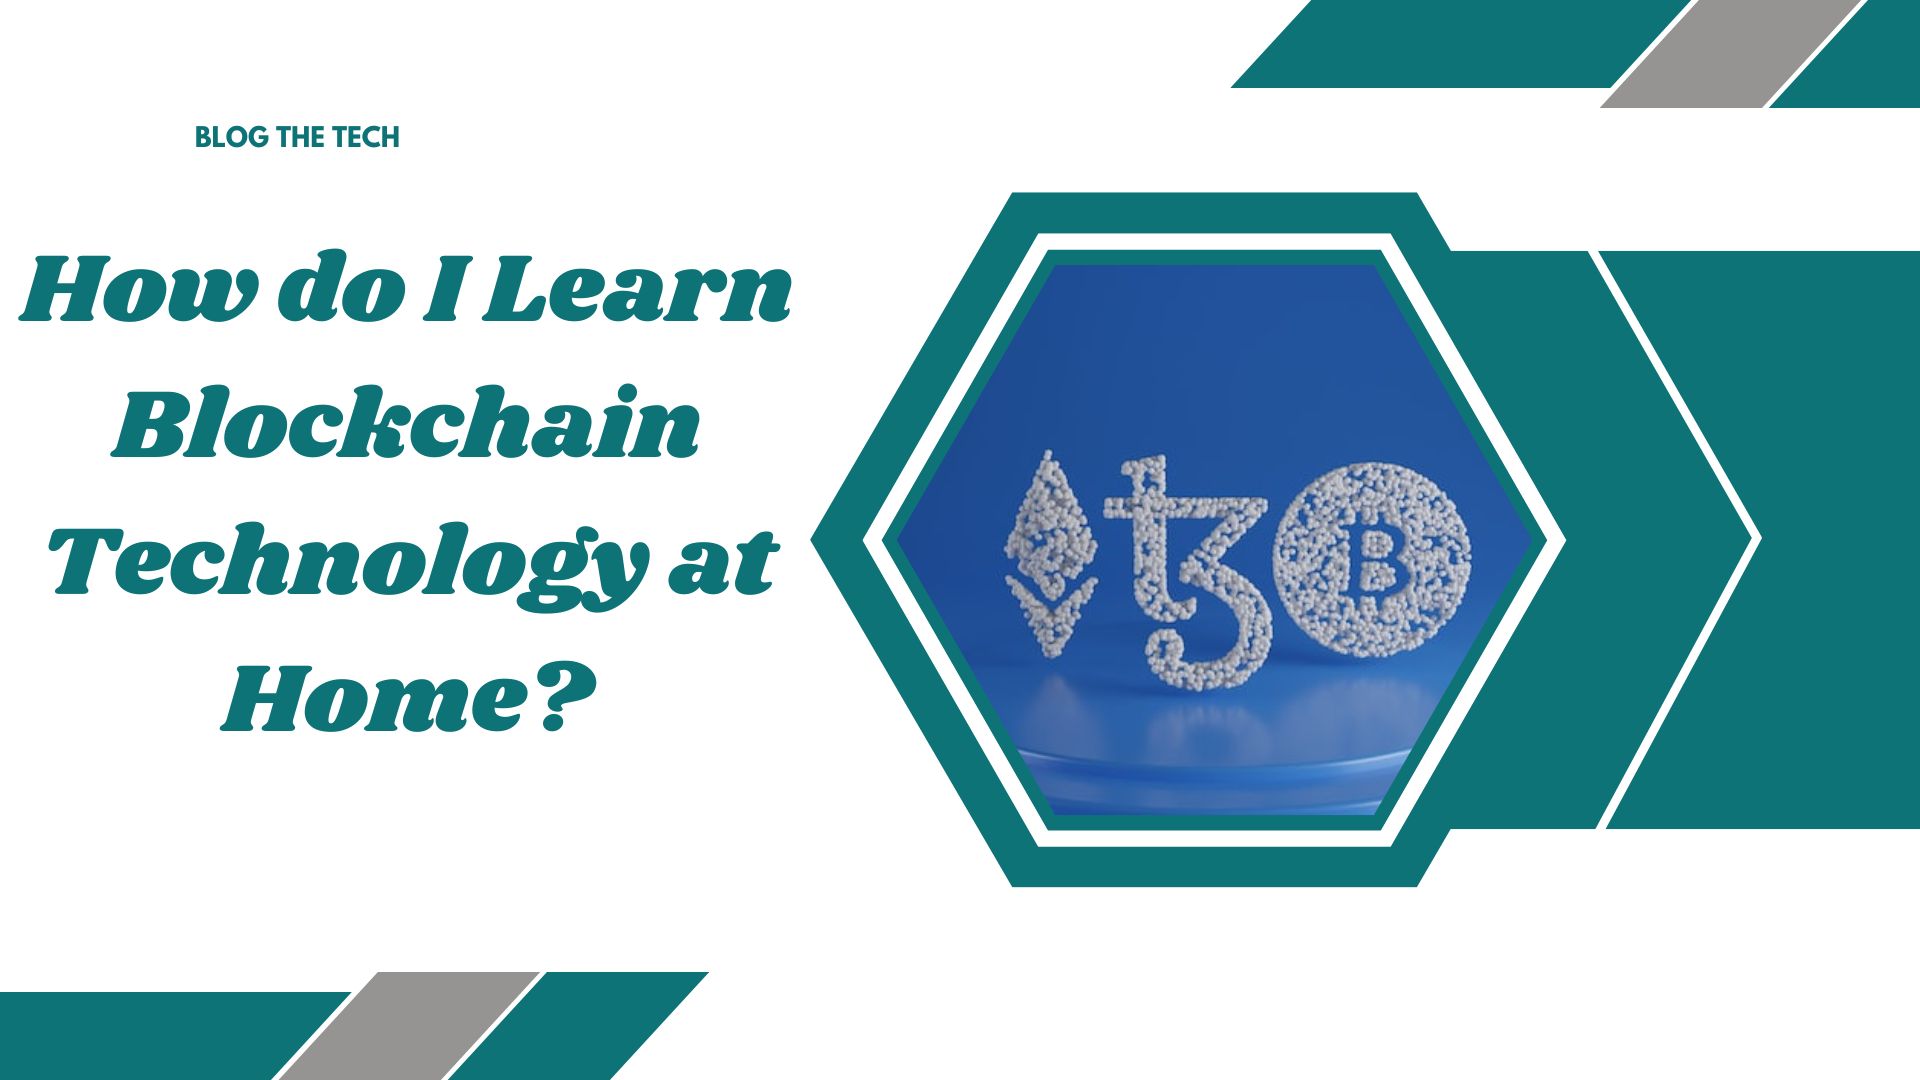 How do I Learn Blockchain Technology at Home?